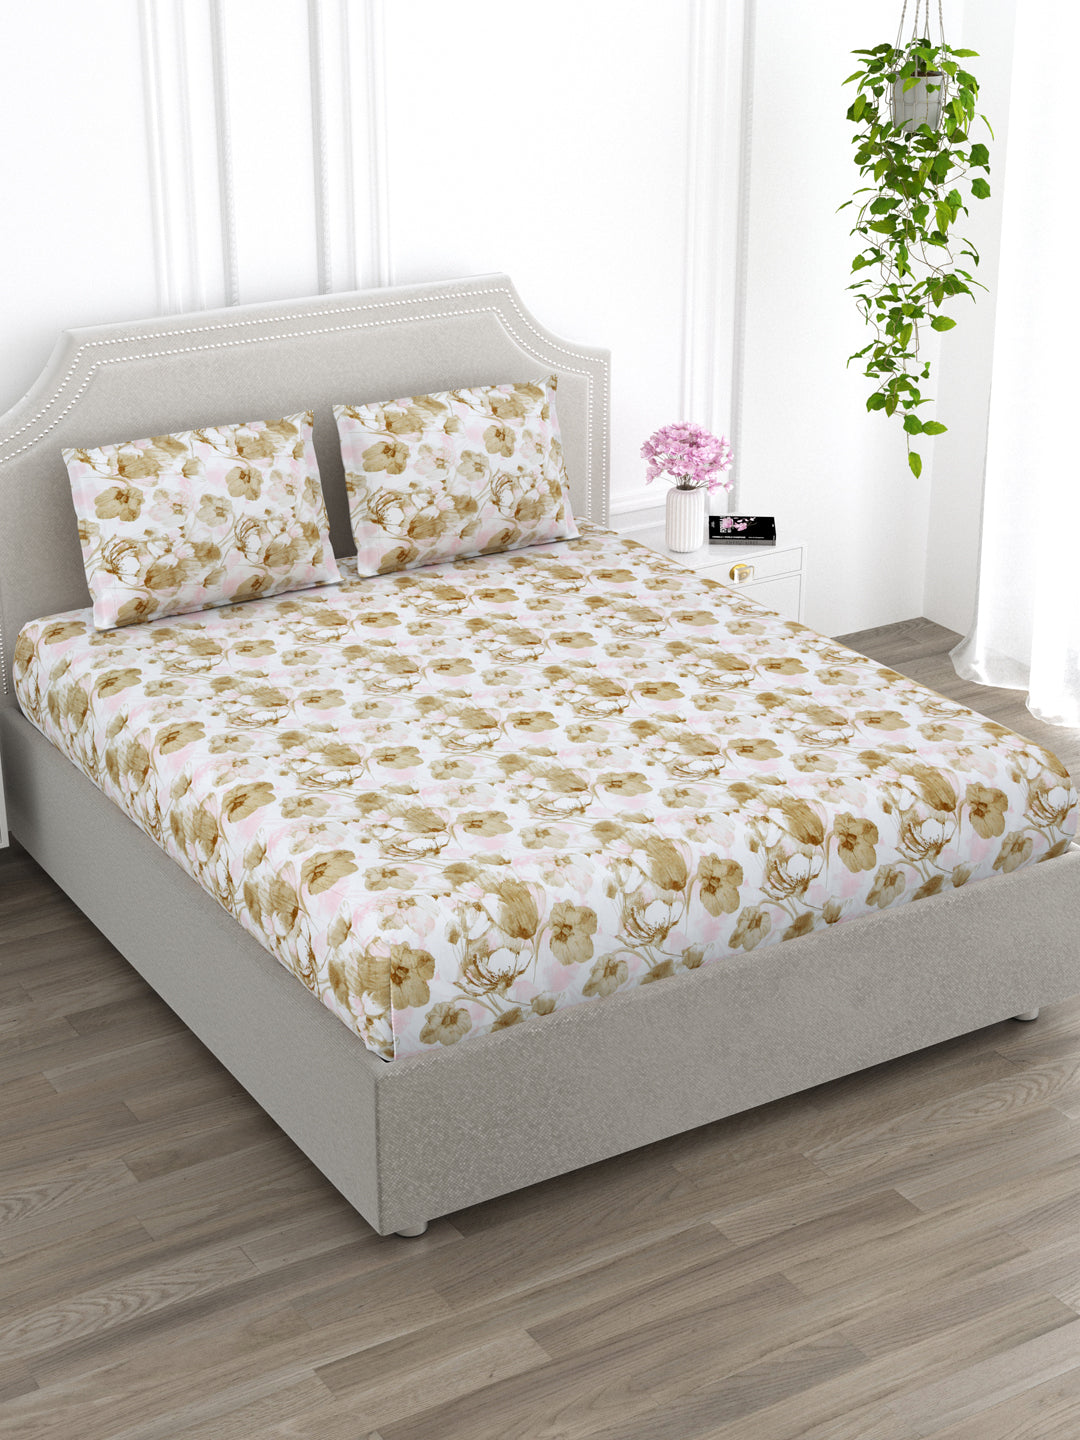 Brown Floral King Size Bed Cotton Linen